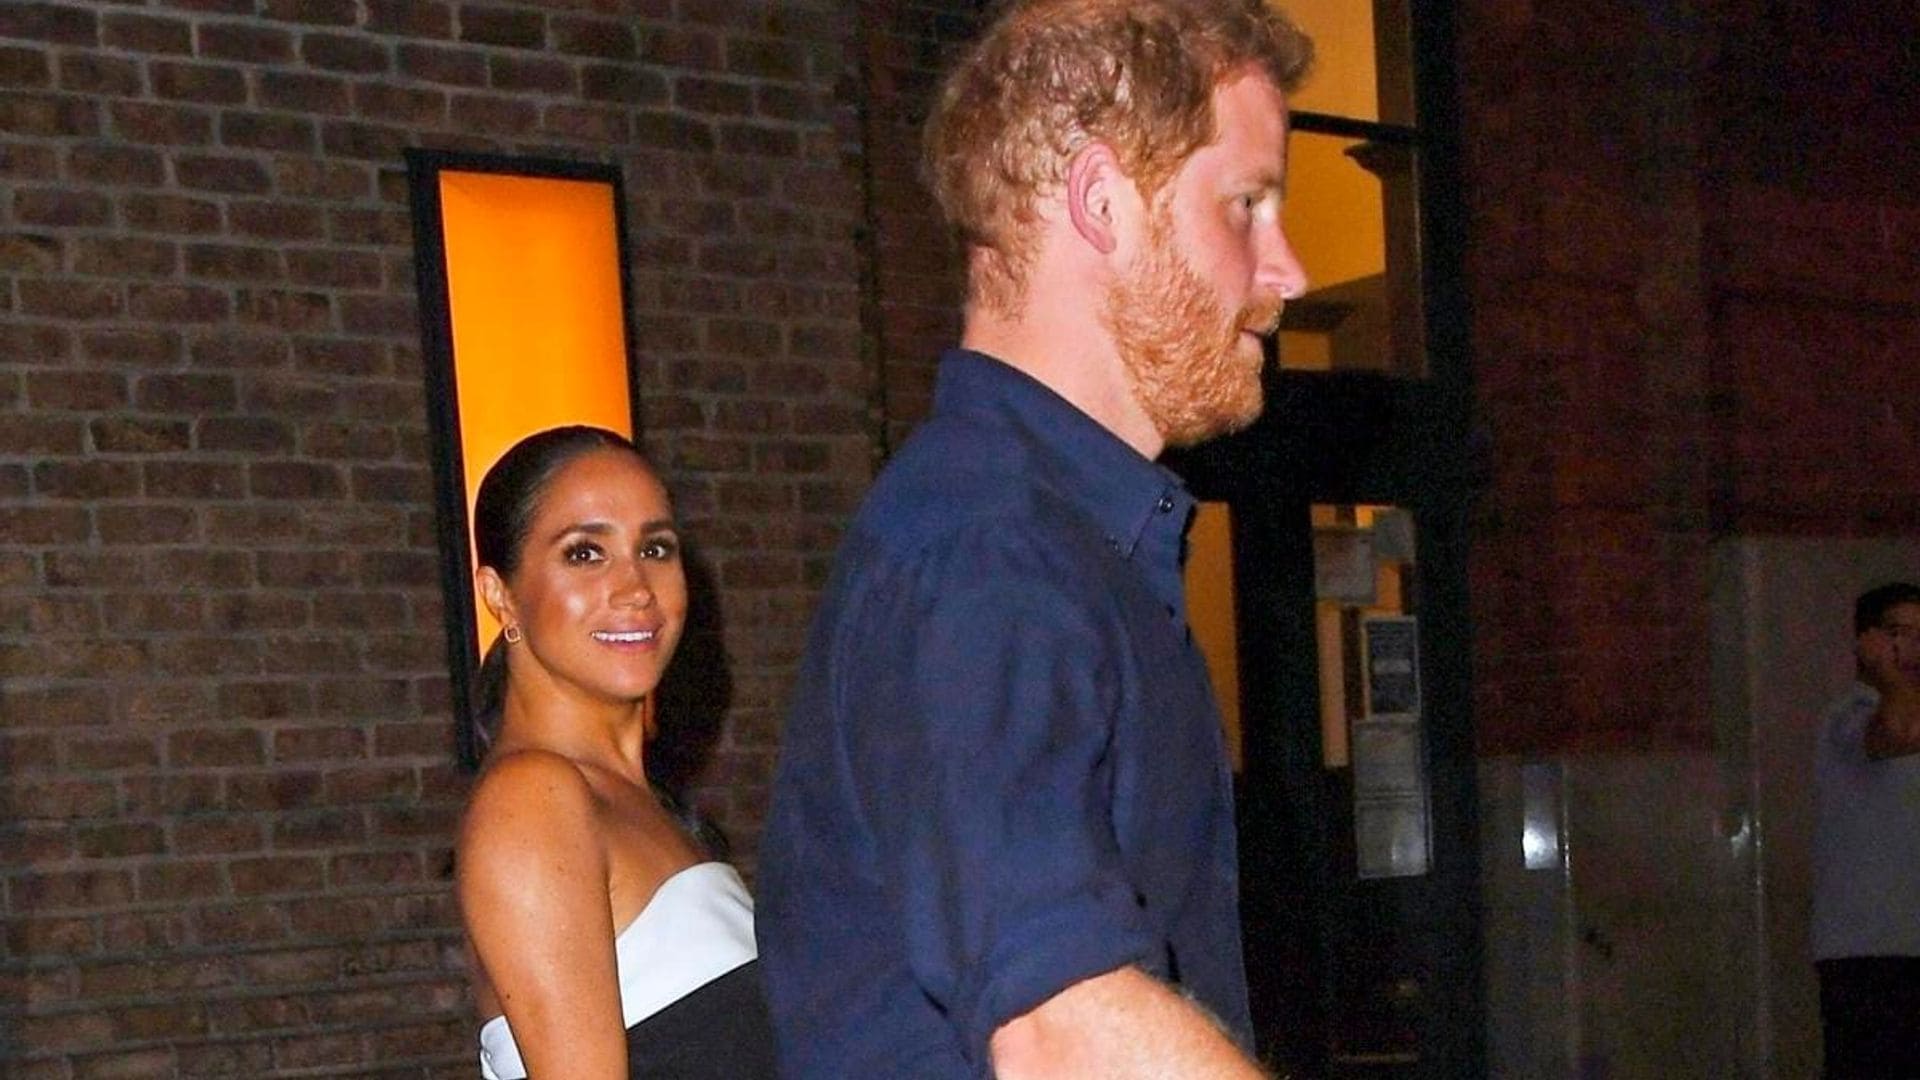 Meghan Markle wears chic jumpsuit for date night in NYC